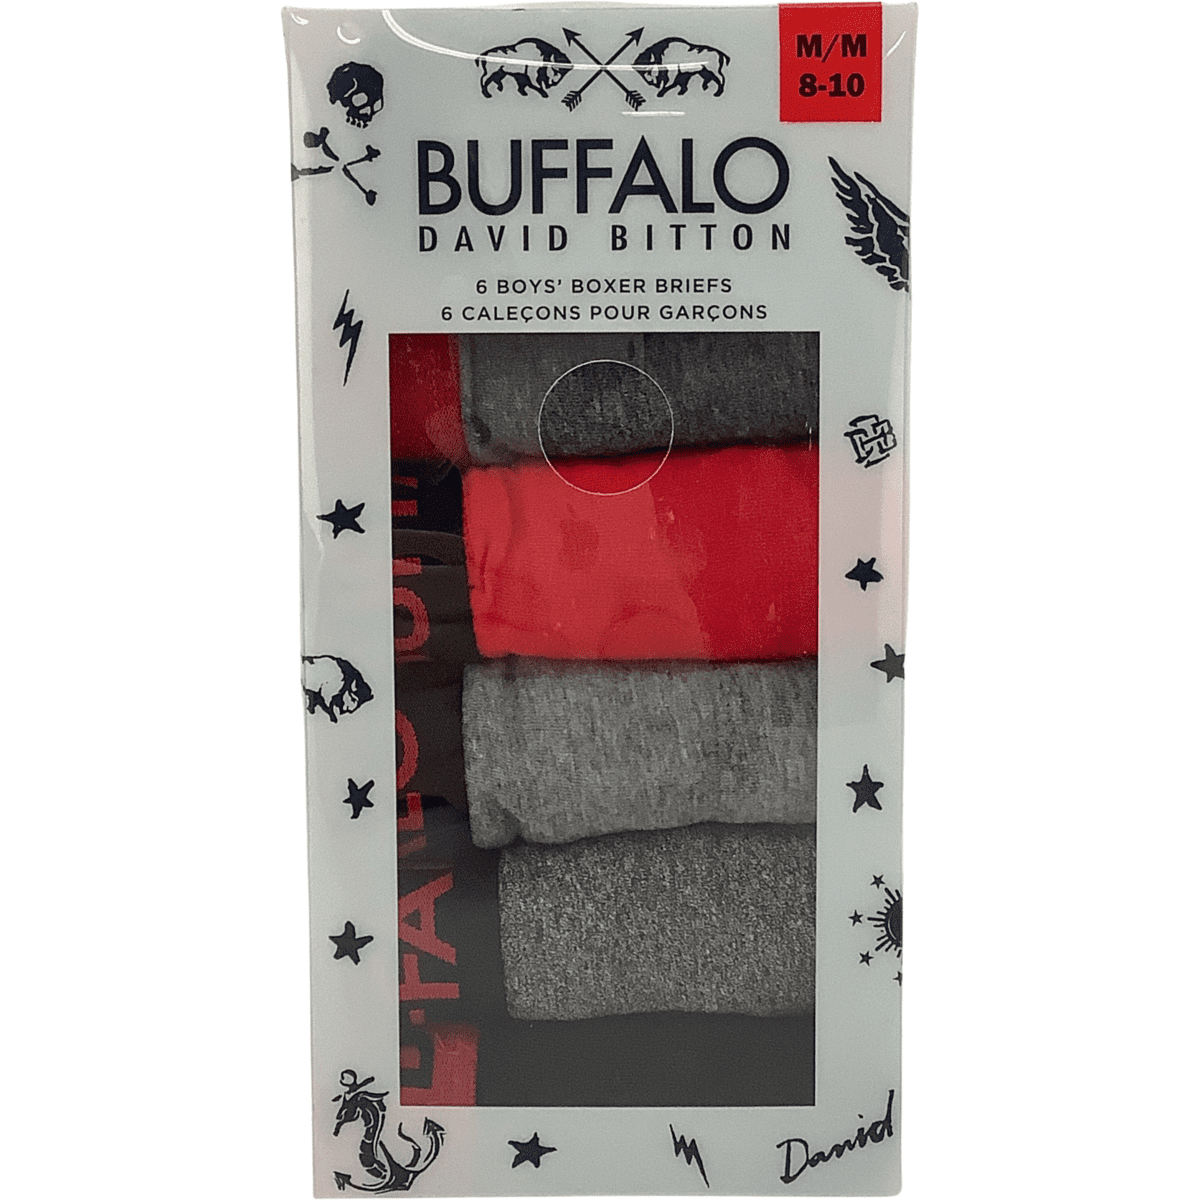 https://www.canadawideliquidations.com/wp-content/uploads/2021/05/Buffalo-David-Bitton-Boys-Boxer-Briefs-in-red-and-Grey_03.png